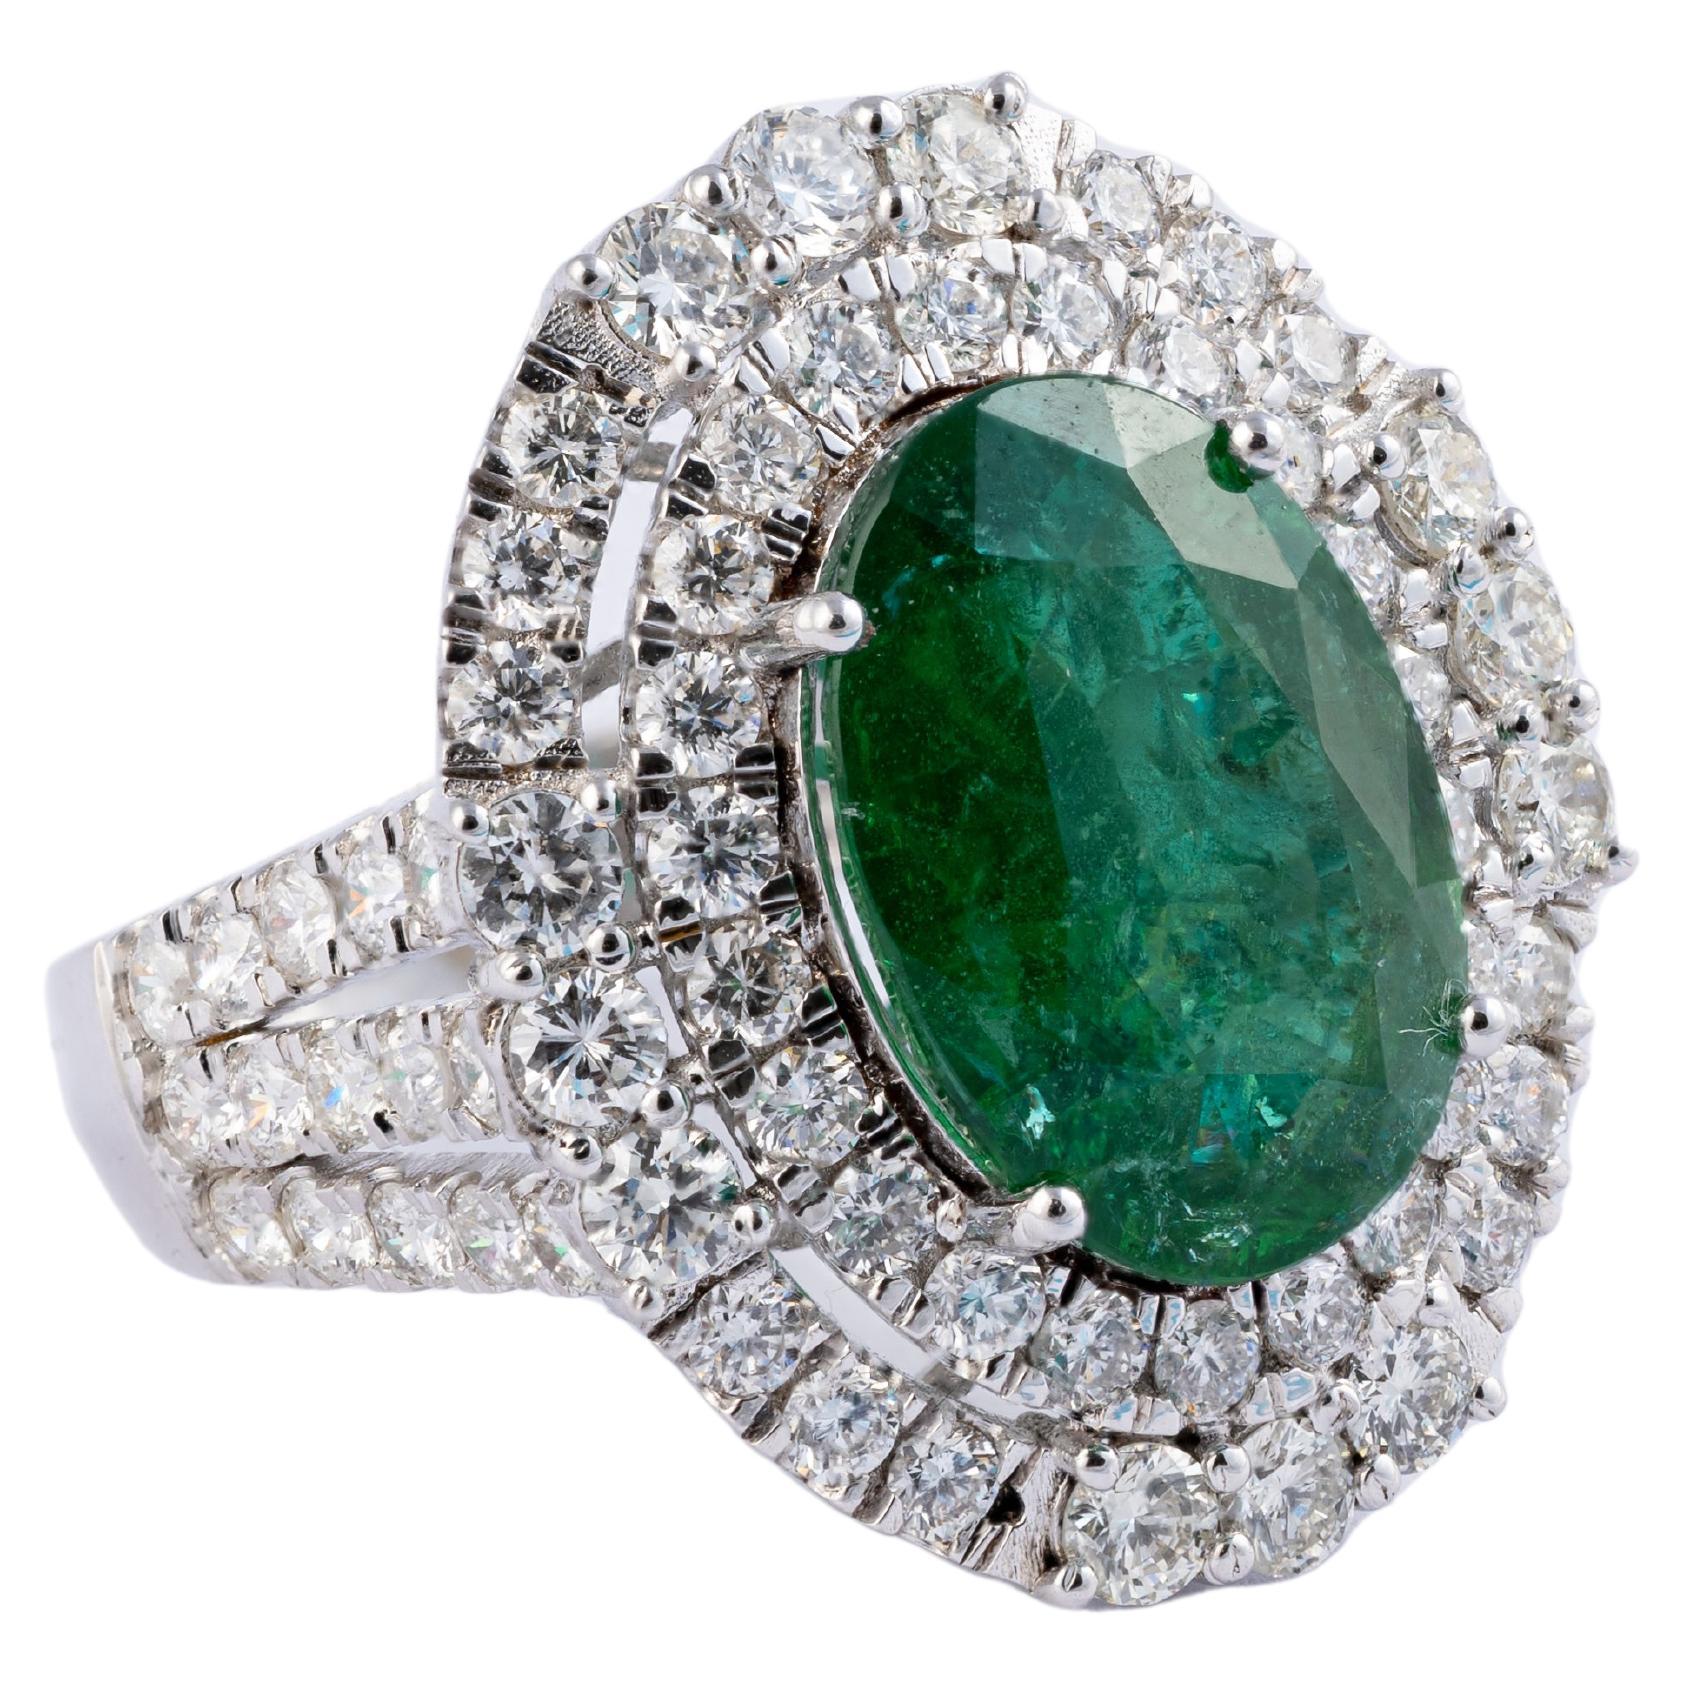 Natural Zambian Emerald 5.97cts with Diamonds 2.74cts ring and 14k Gold For Sale